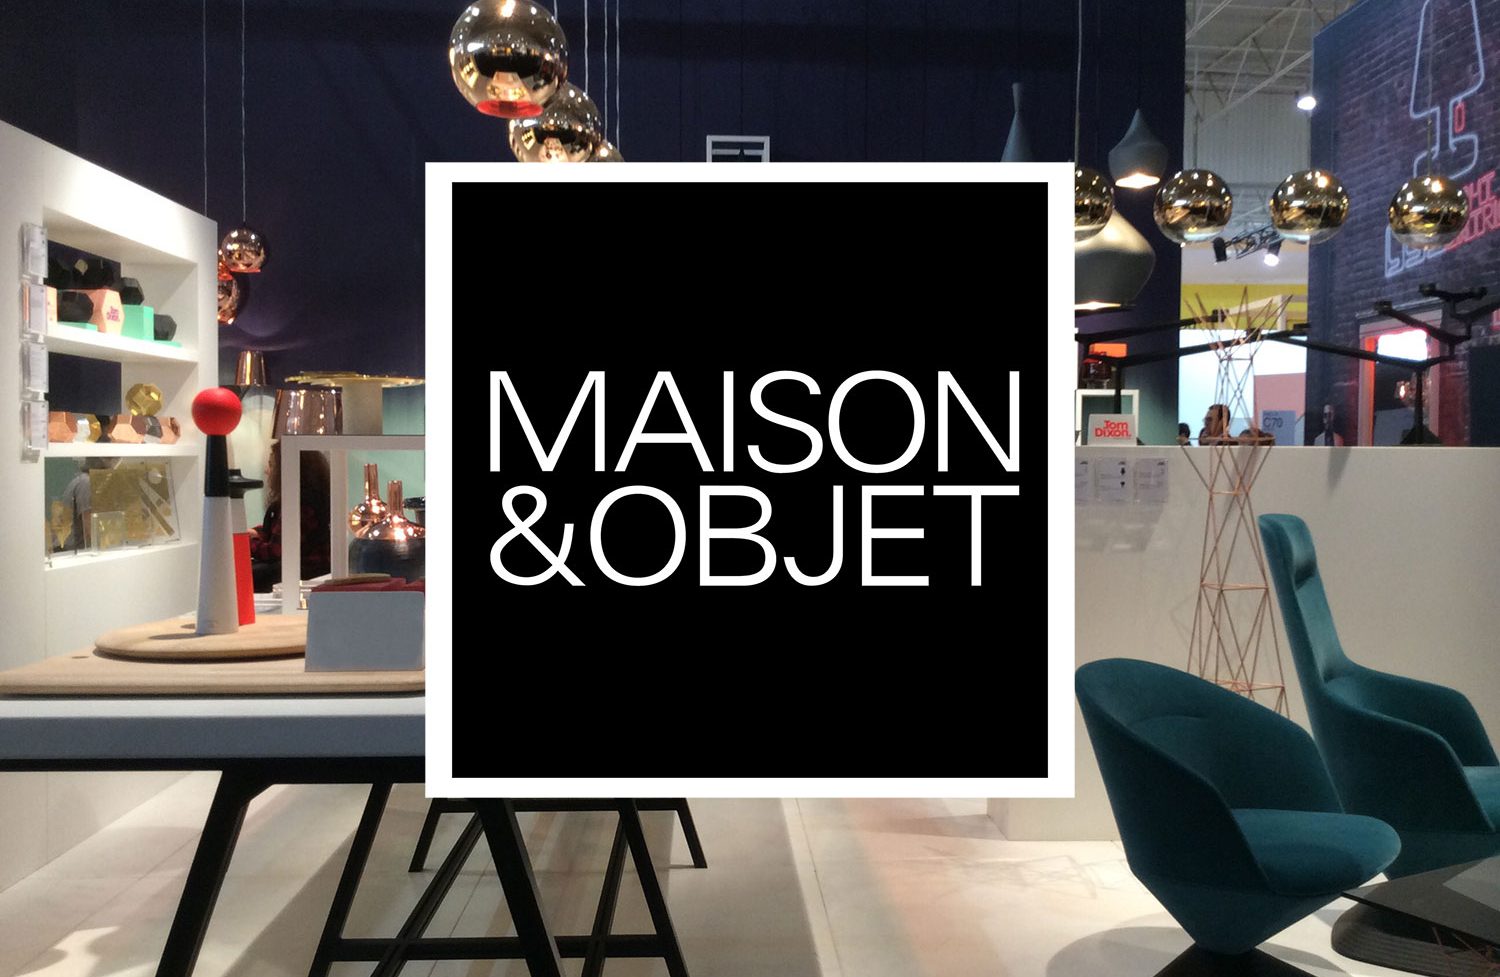 Top 5 Trends To Watch from Maison & Objet 2019